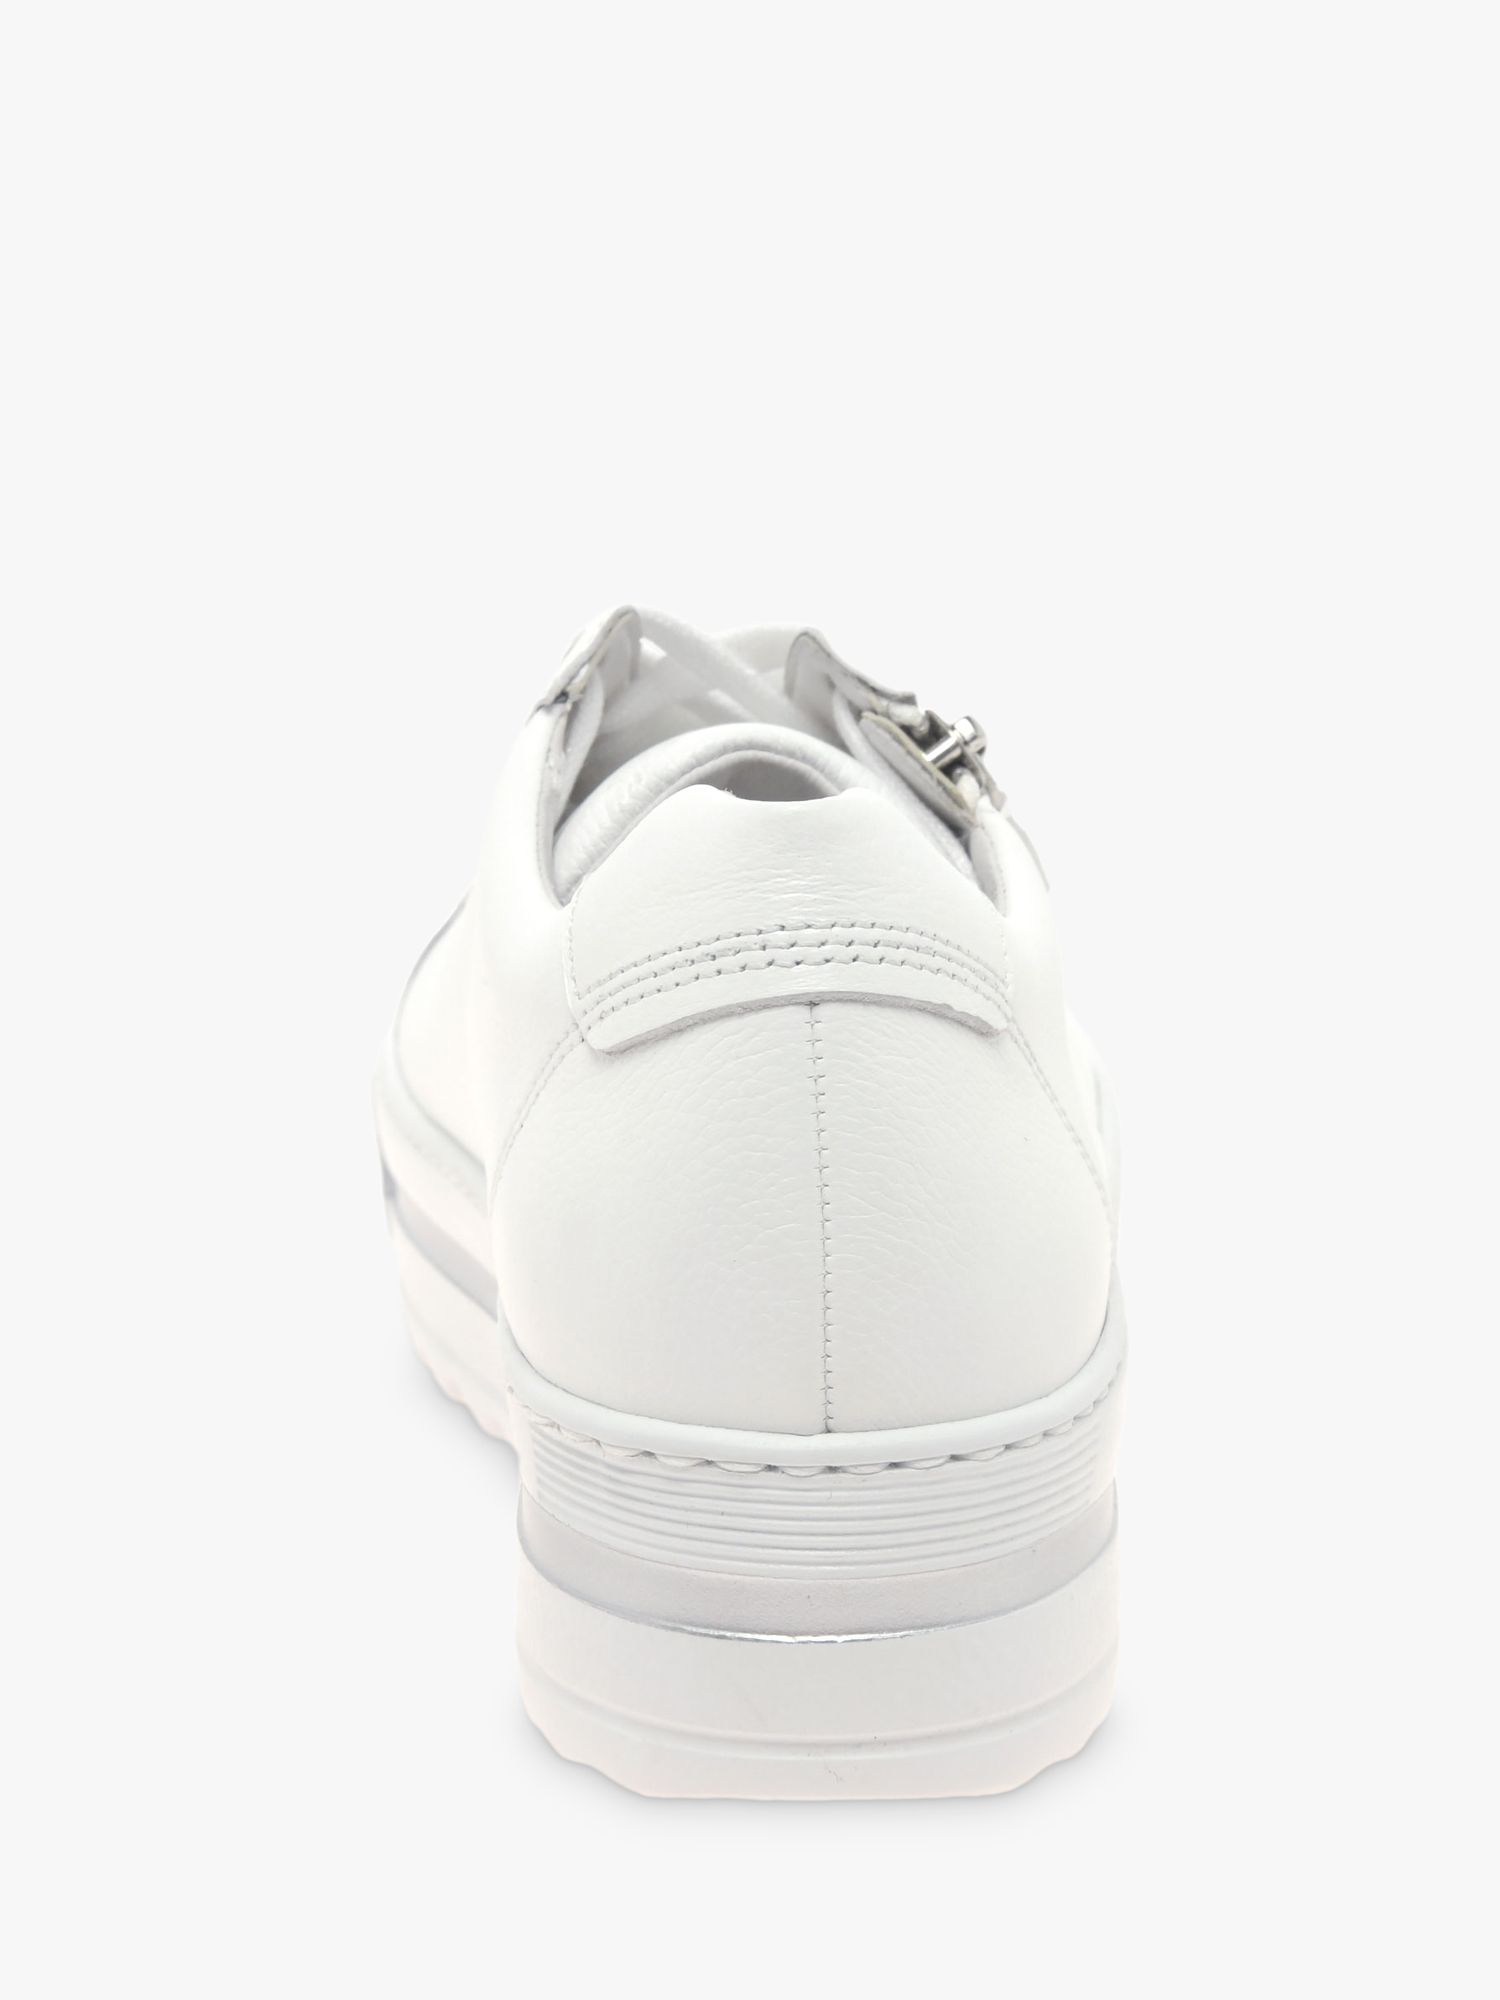 Gabor Heather Wide Fit Leather Flatform Trainers, White, 3